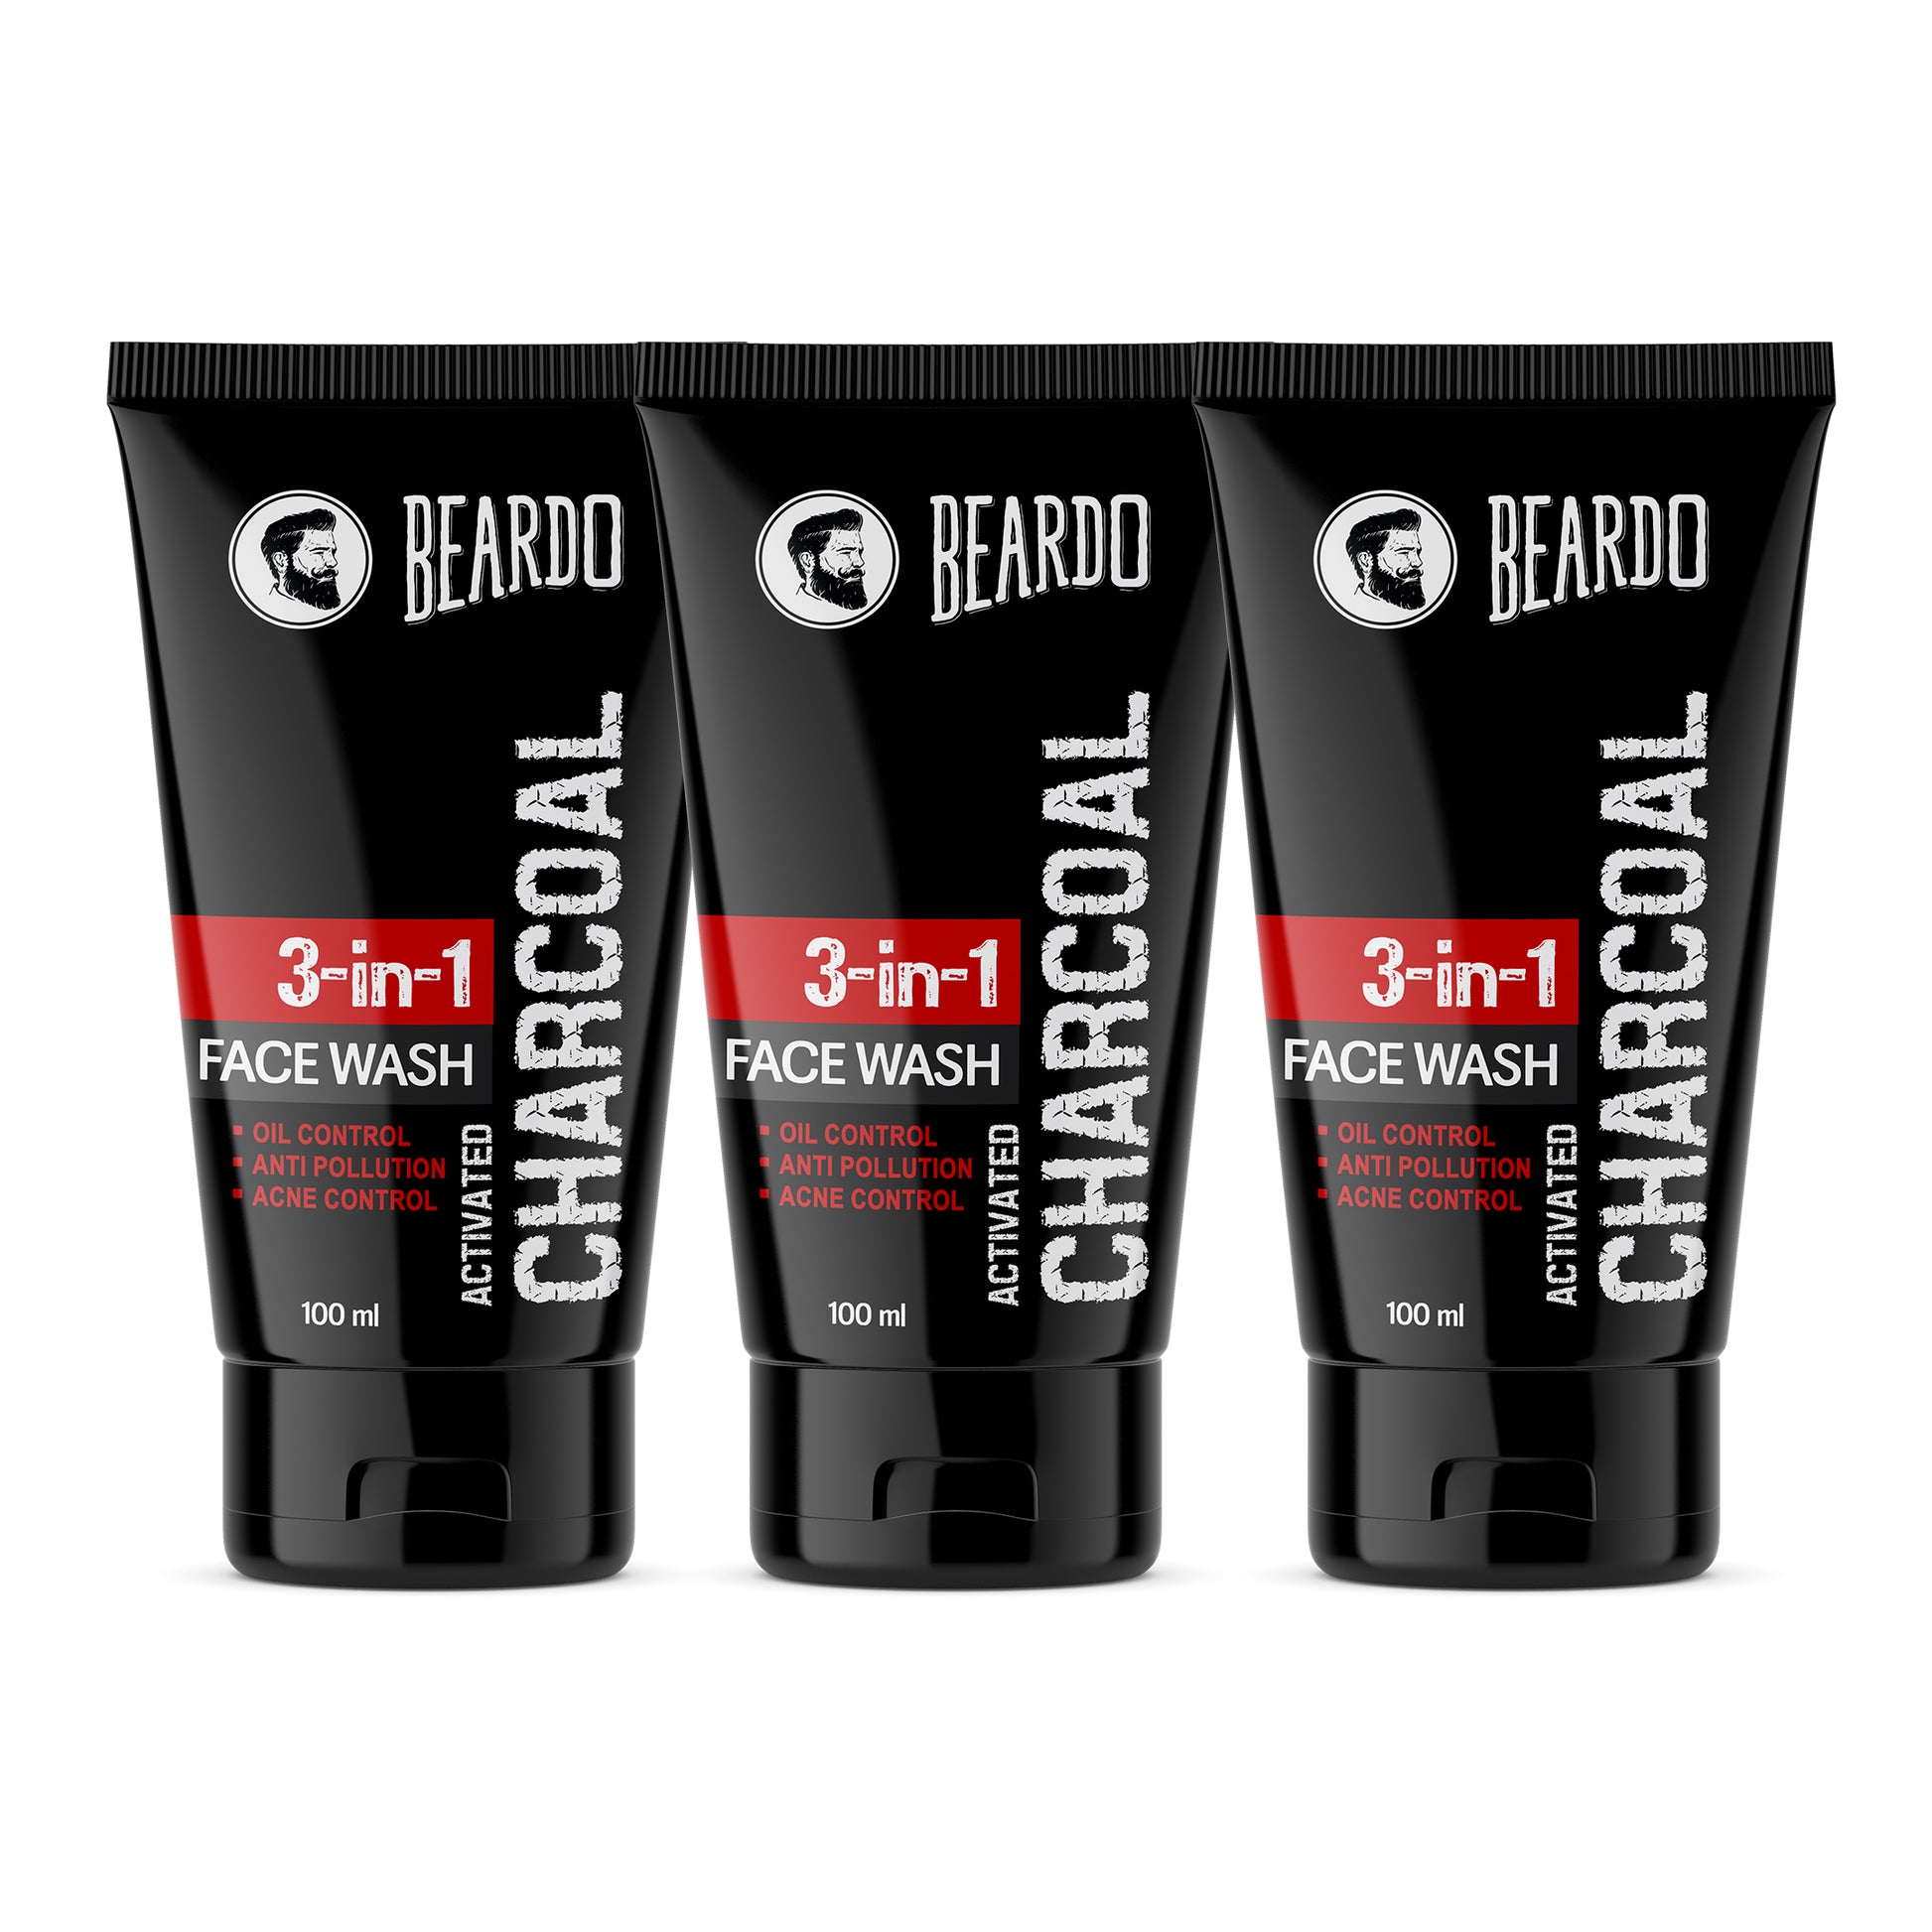 Activated charcoal facewash pack of 3